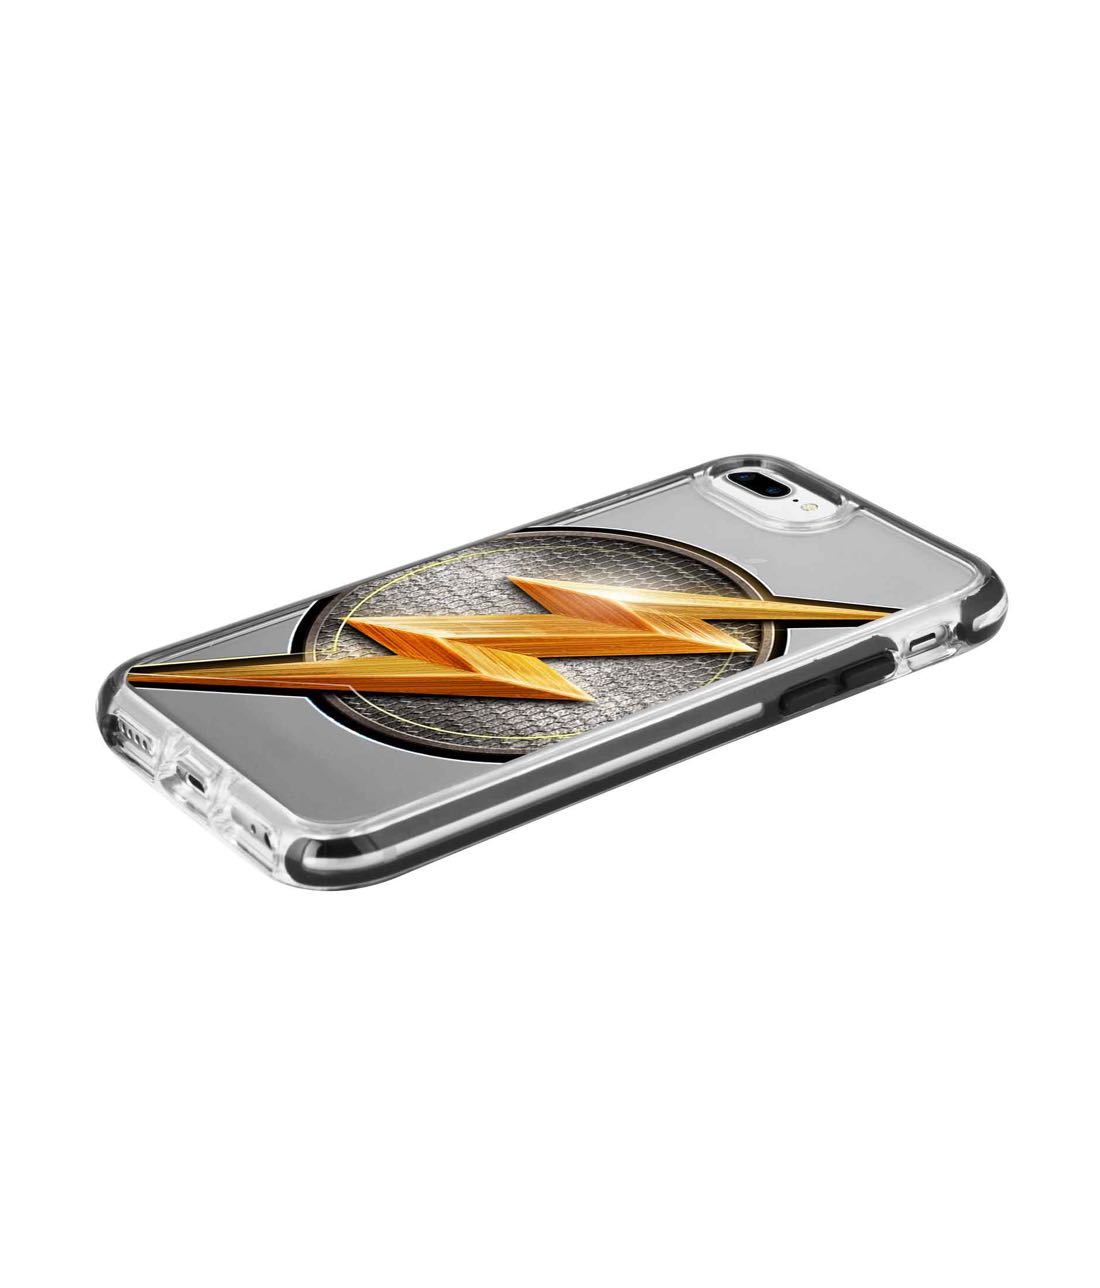 Flash Storm - Extreme Phone Case for iPhone 7 Plus